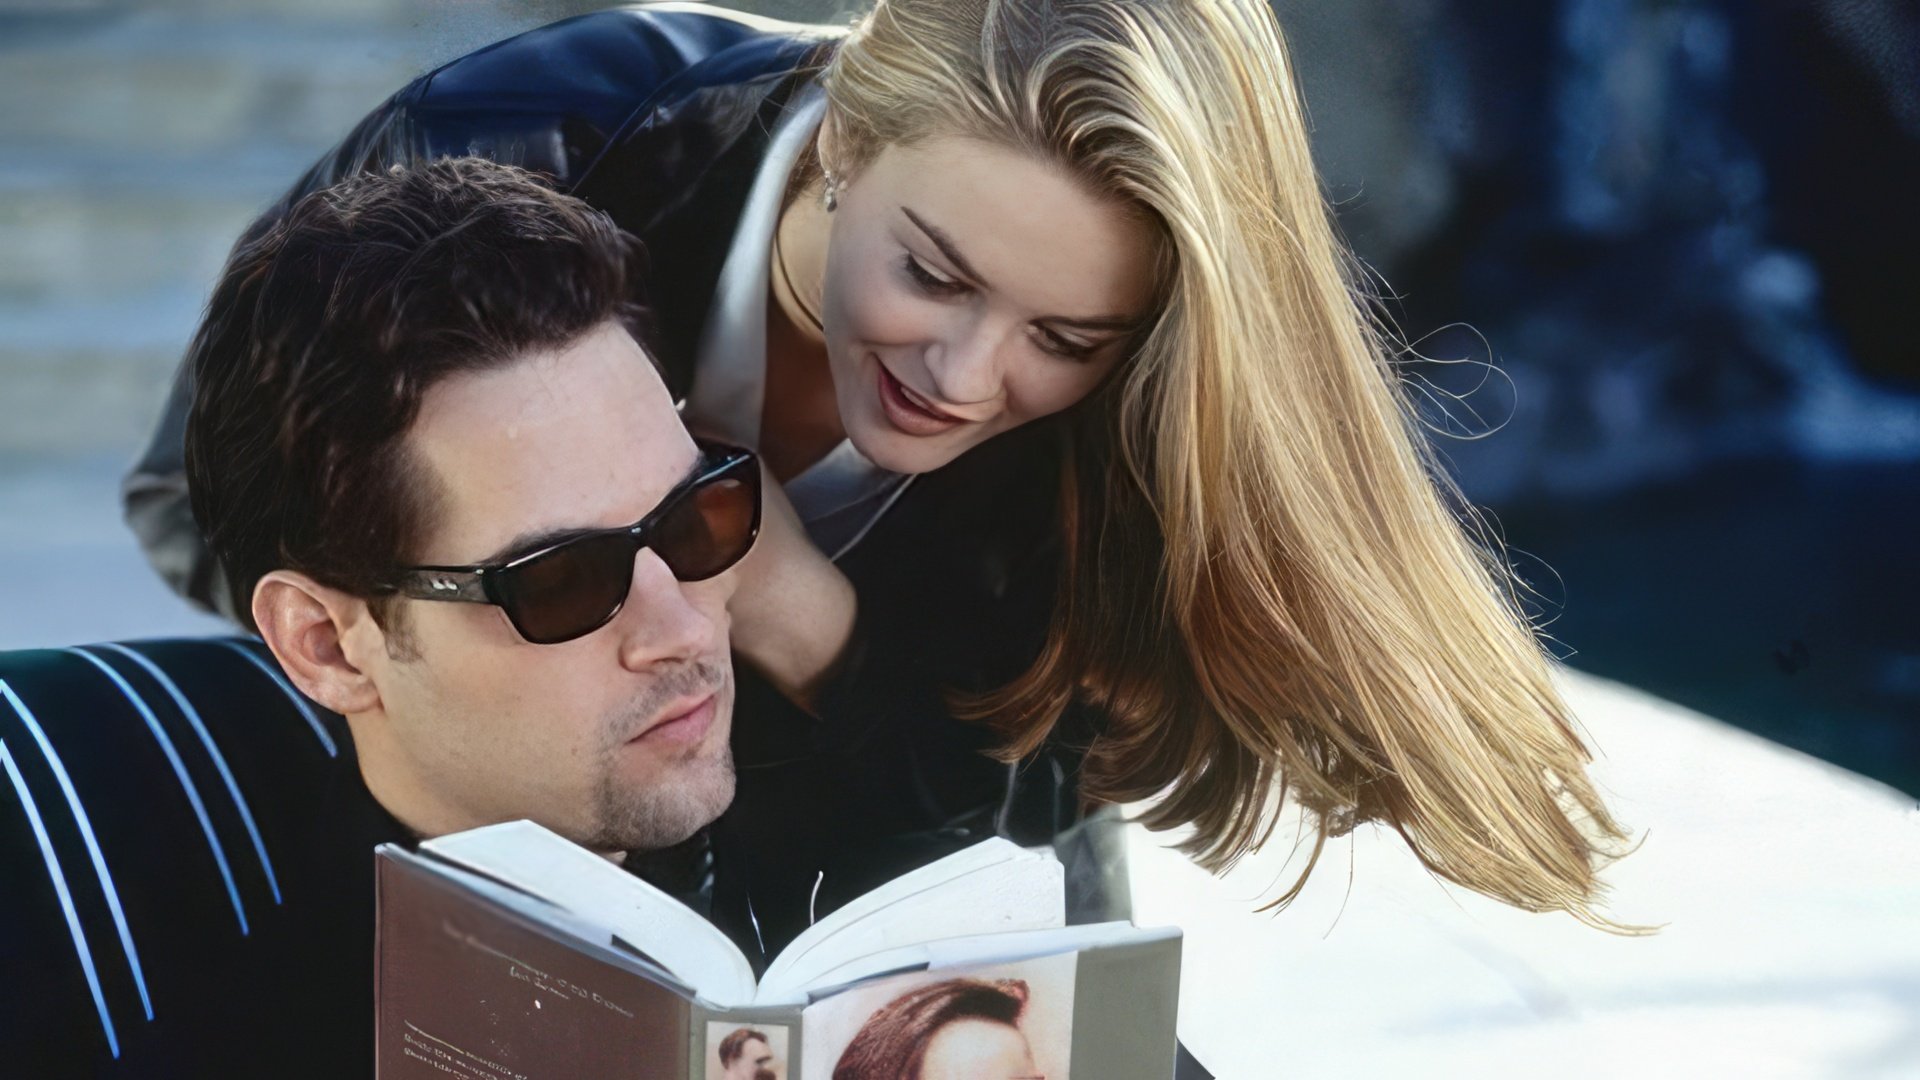 Paul Rudd and Alicia Silverstone in the film Clueless